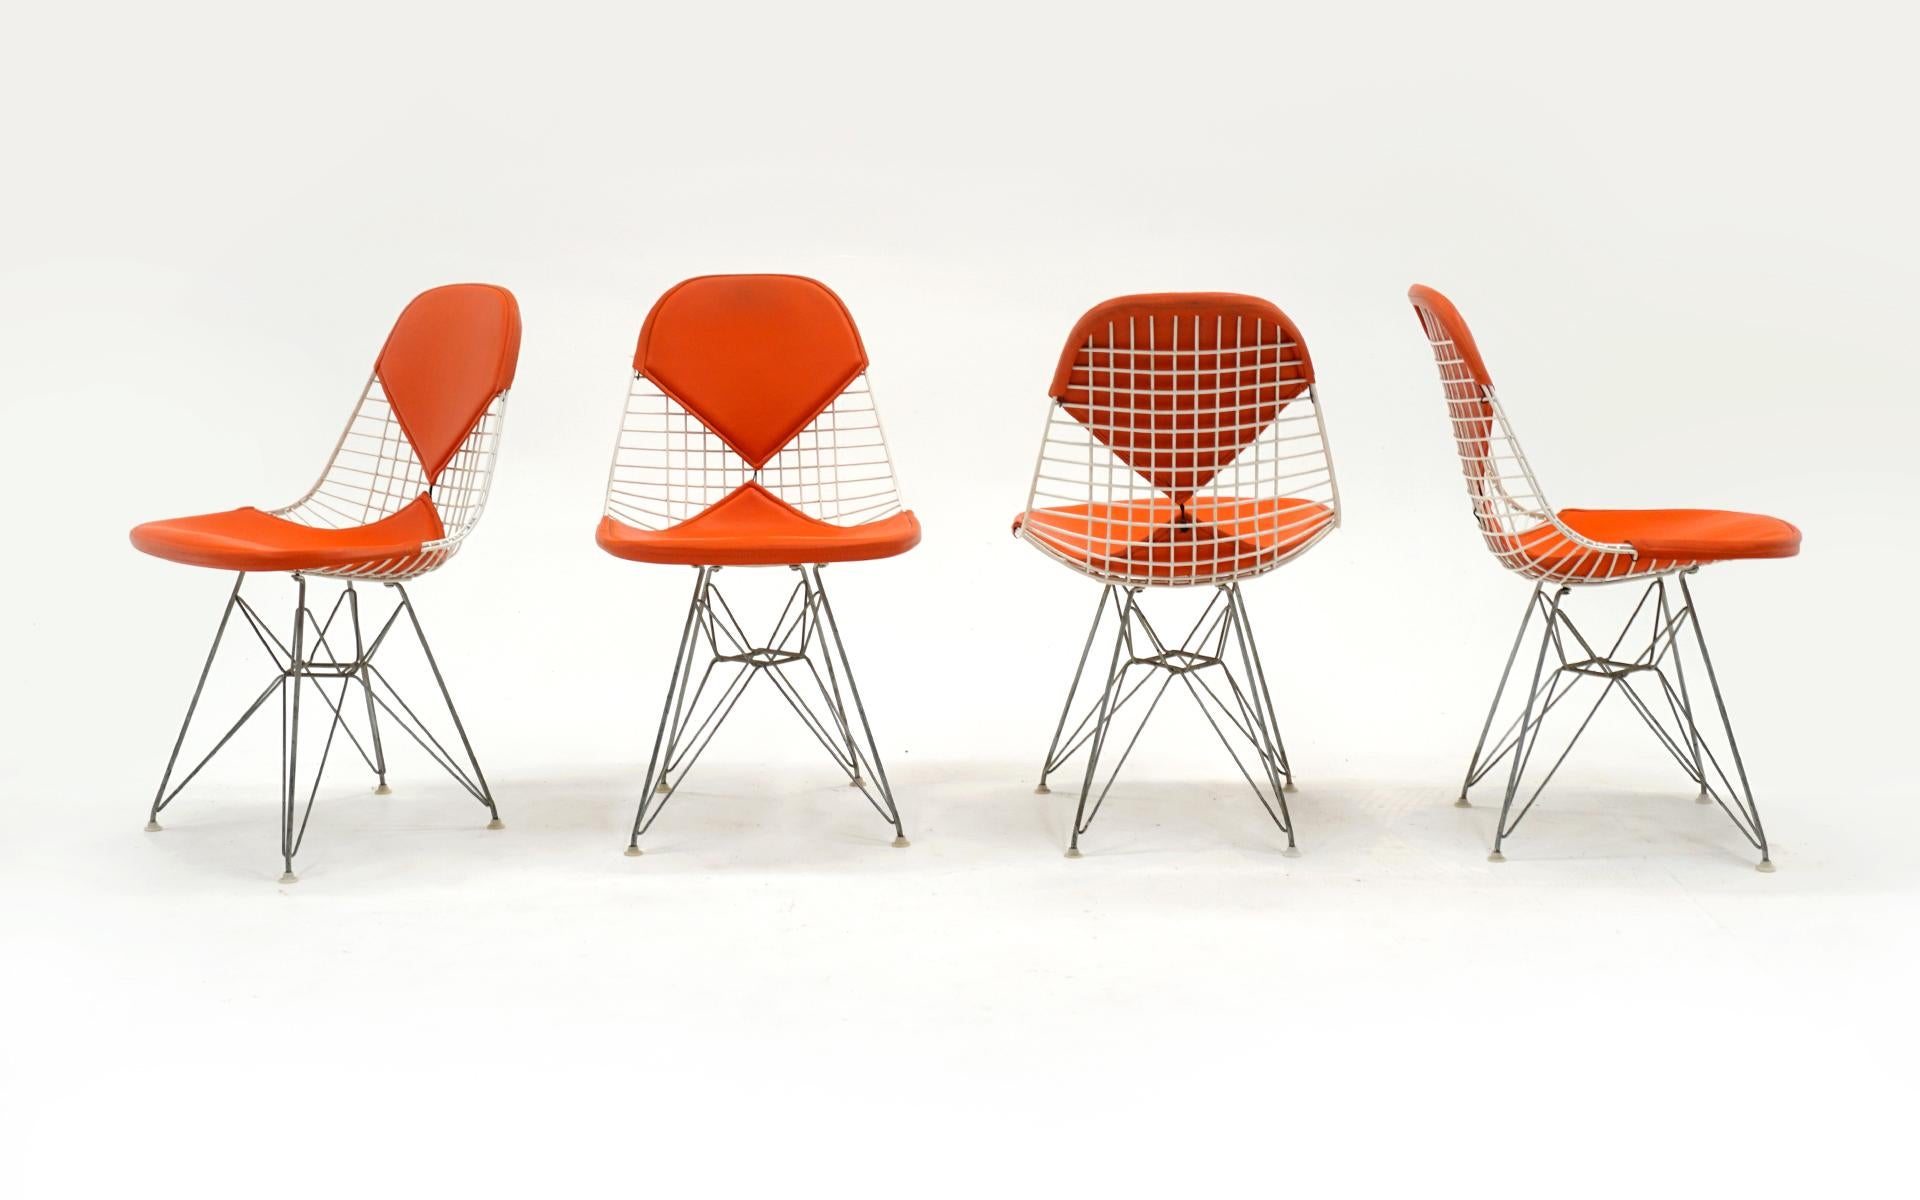 Set of four original white wire Charles and Ray Eames for Herman Miller white wire DKR dining chairs with original orange bikini covers. Zinc Eiffel Tower bases. All feet intact and original. Very good condition, ready to use.